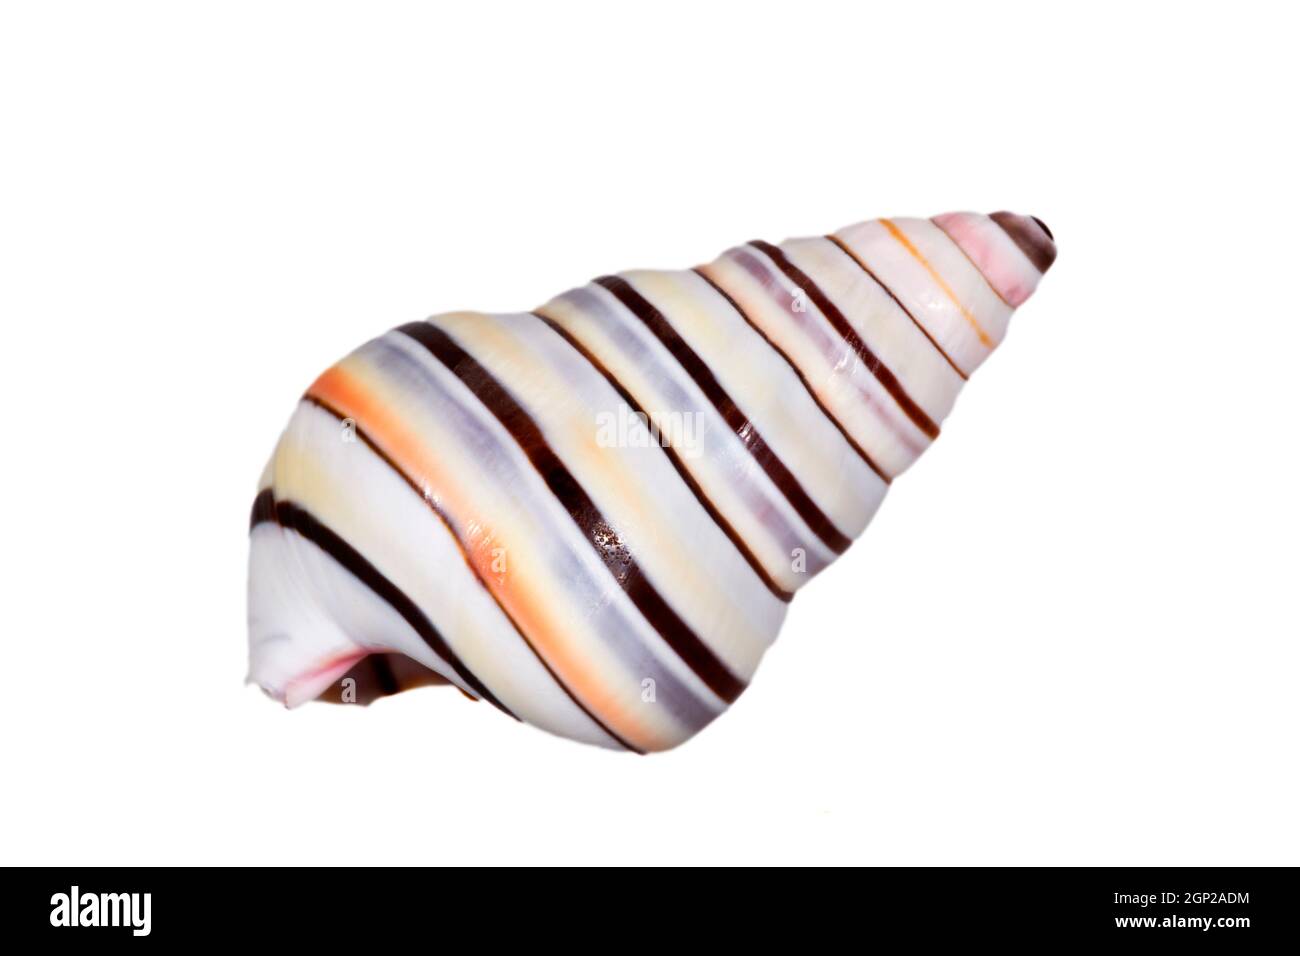 Single striped shell of Liguus virgineus also known as the candy cane snail, tree-living snail native to the Caribbean isolated on white background, c Stock Photo